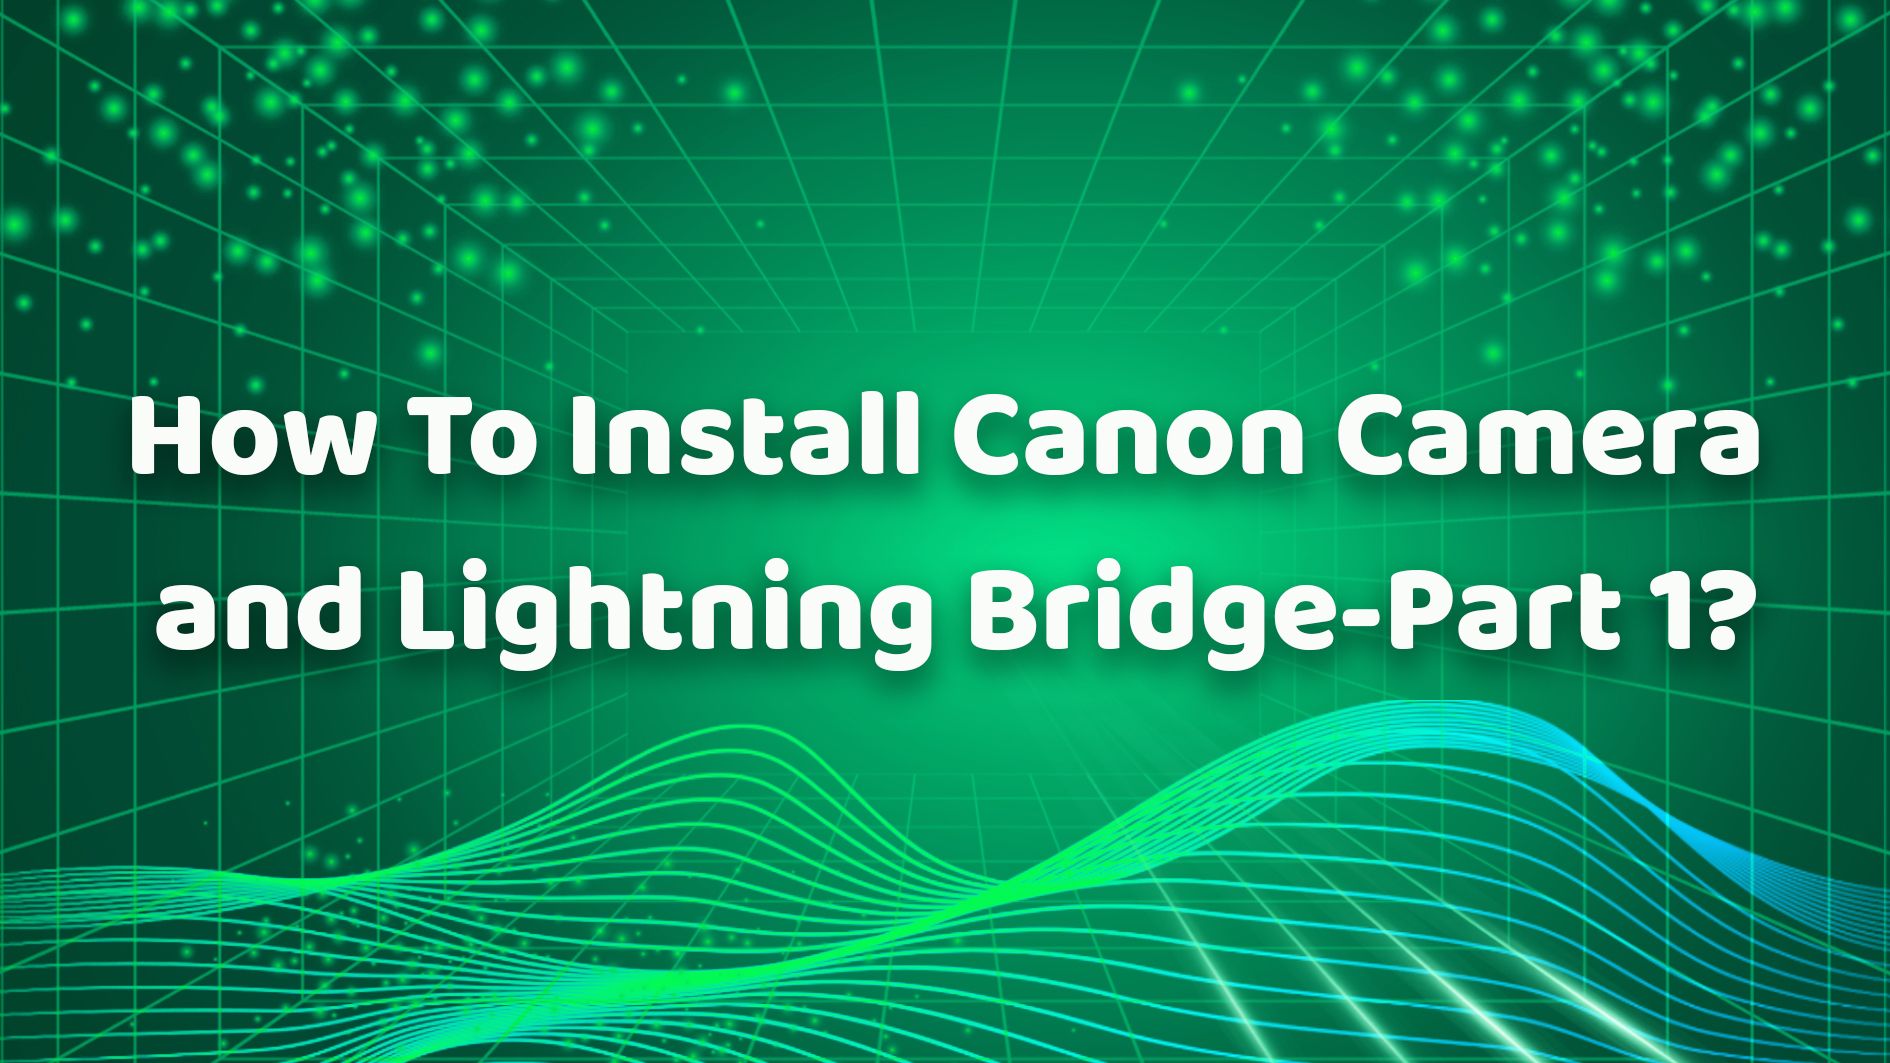 How To Install Canon Camera and Lightning Bridge-Part 1